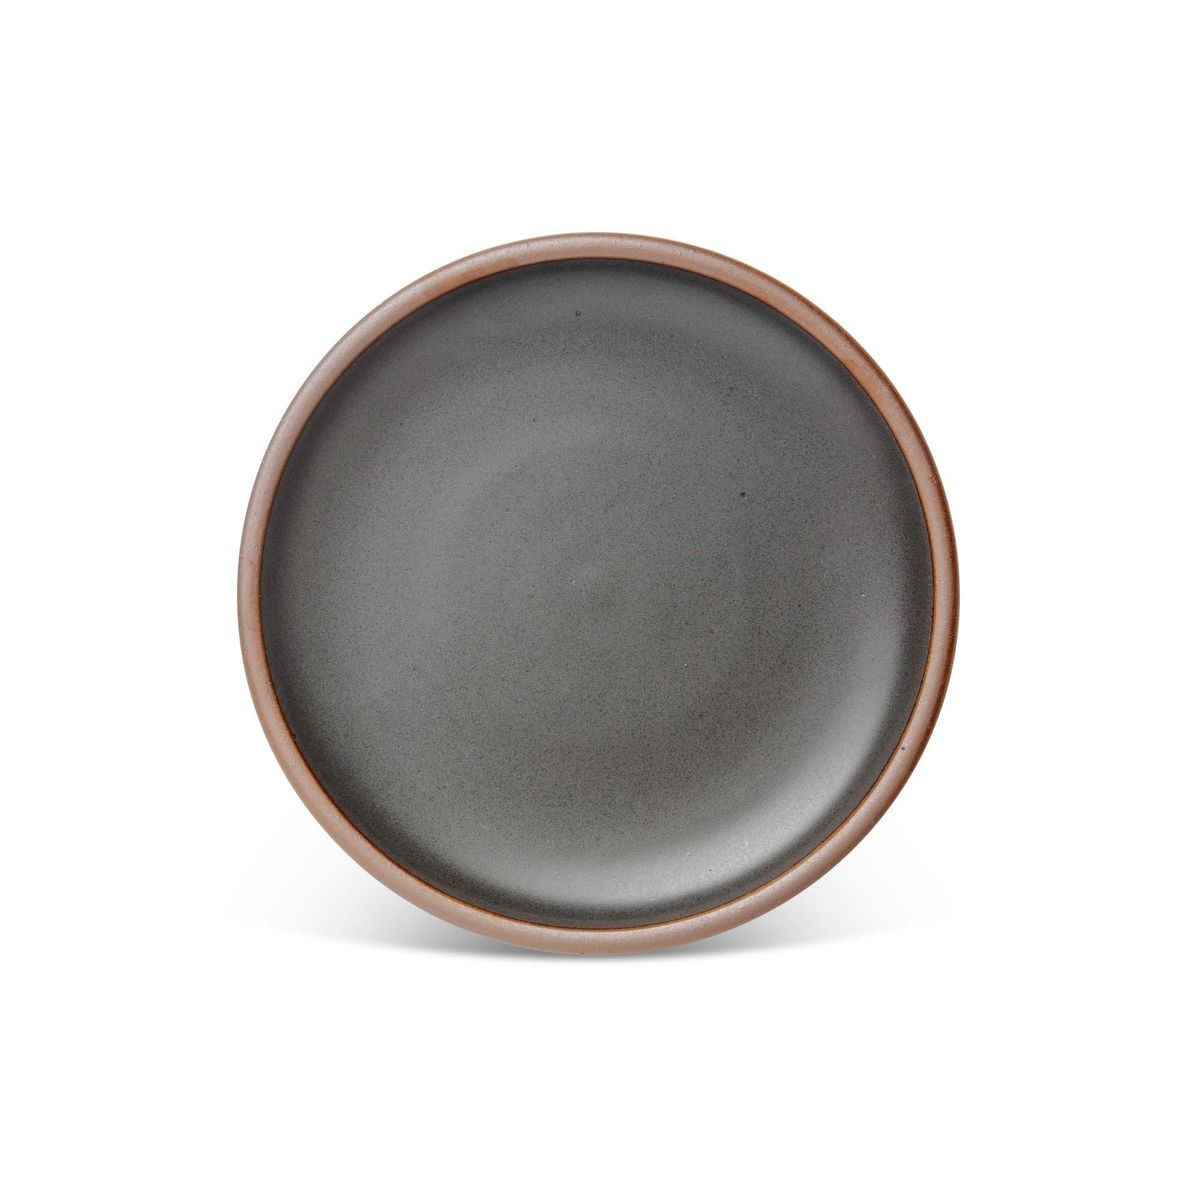 A dinner sized ceramic plate in a cool, medium grey color featuring iron speckles and an unglazed rim